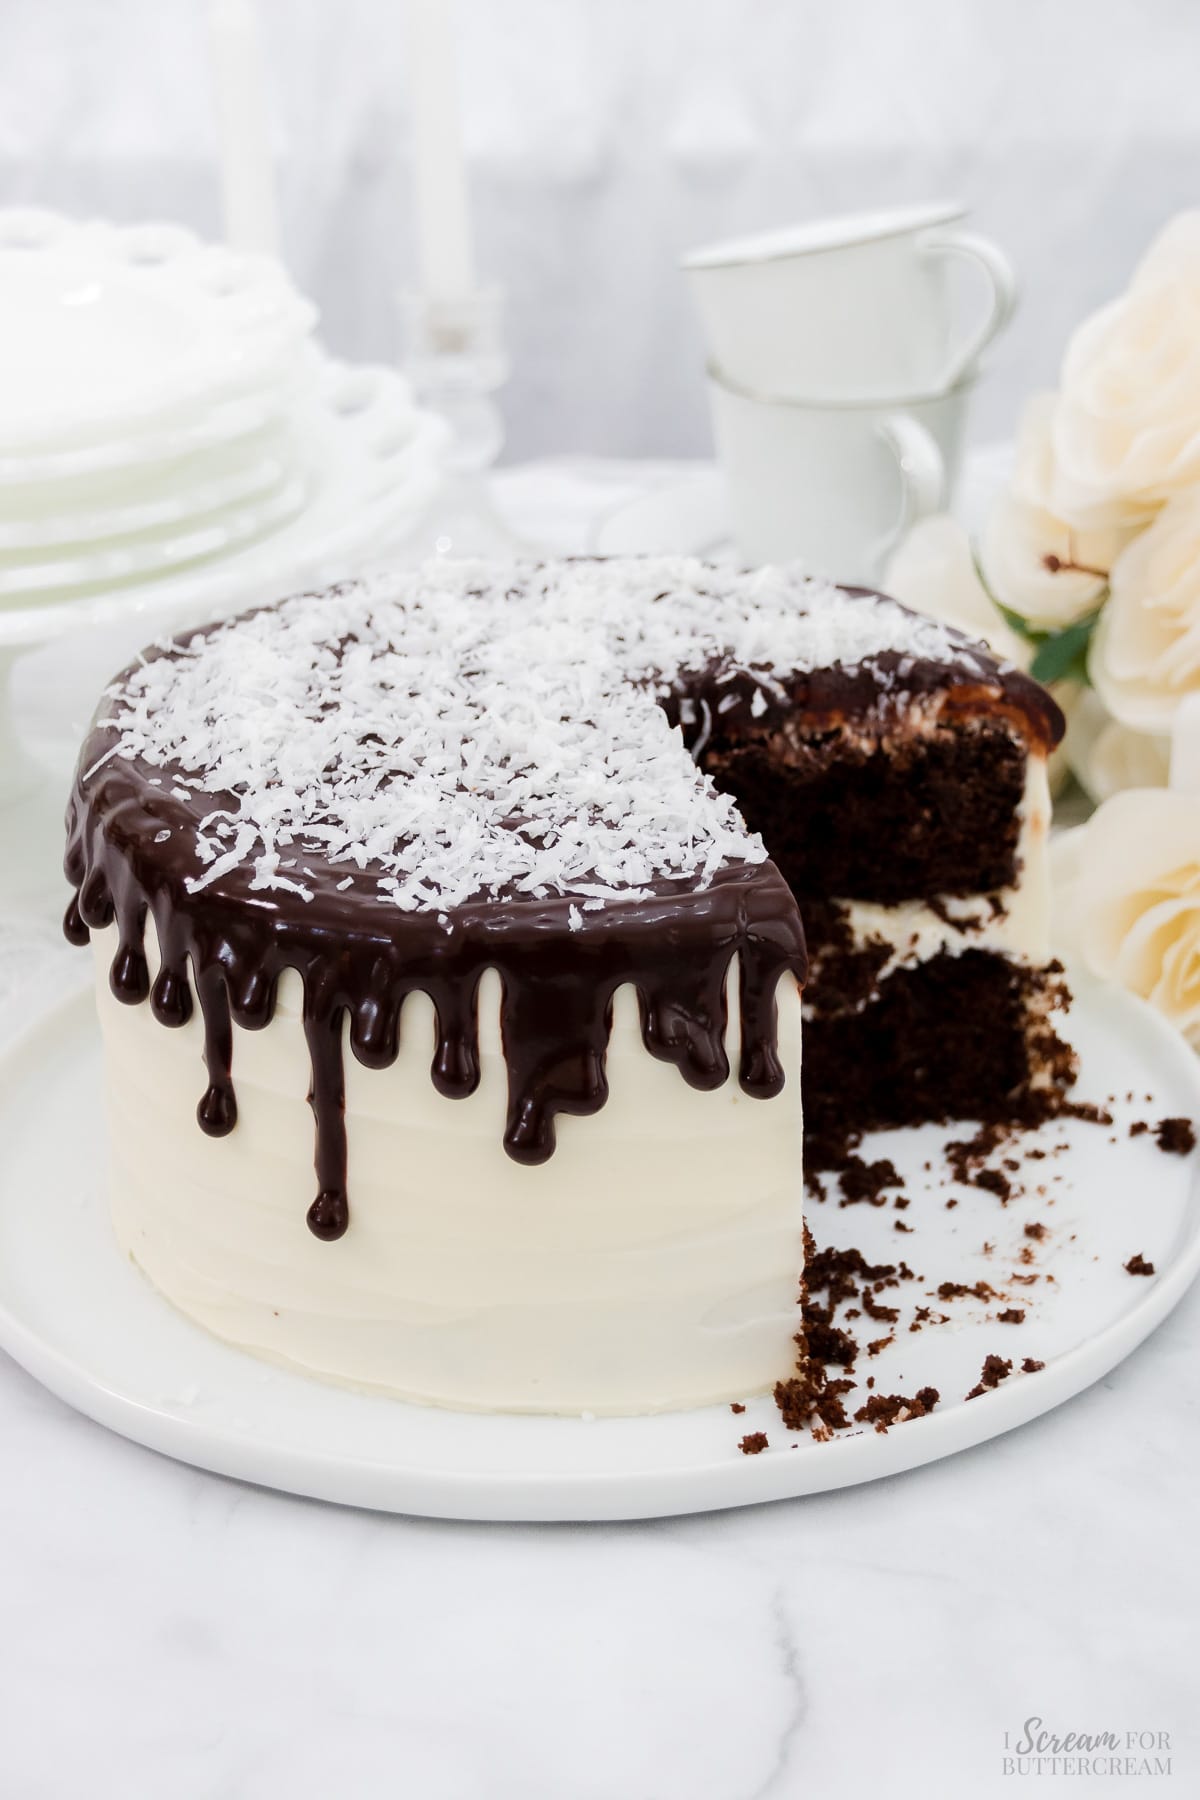 Decorated chocolate cake covered in cream cheese frosting with coconut and chocolate on top.